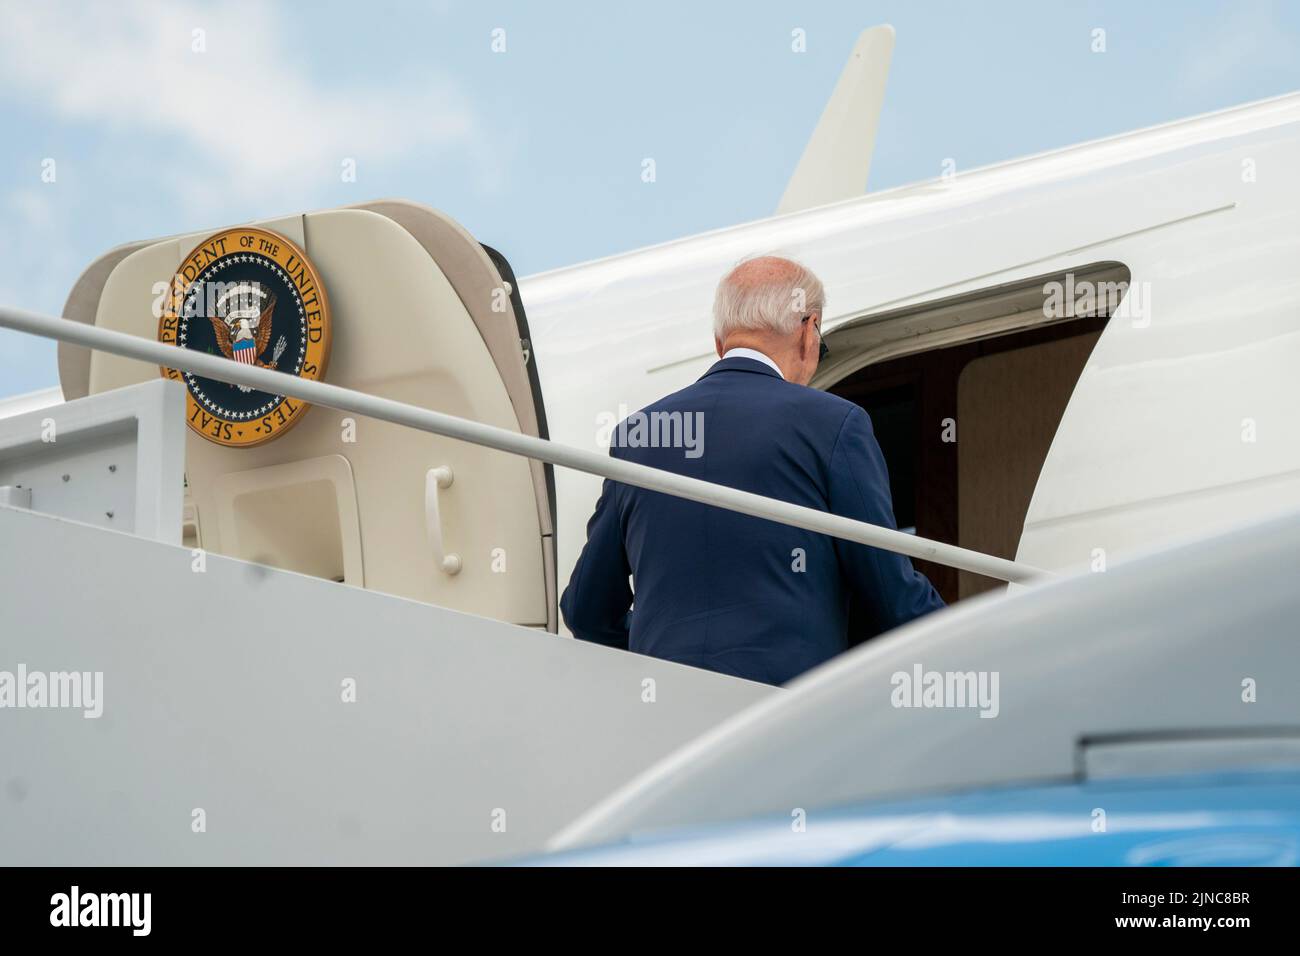 United States President Joe Biden boards Air Force One at Joint Base Andrews, Maryland, USA, 10 August 2022.Credit: Shawn Thew/Pool via CNP /MediaPunch Stock Photo